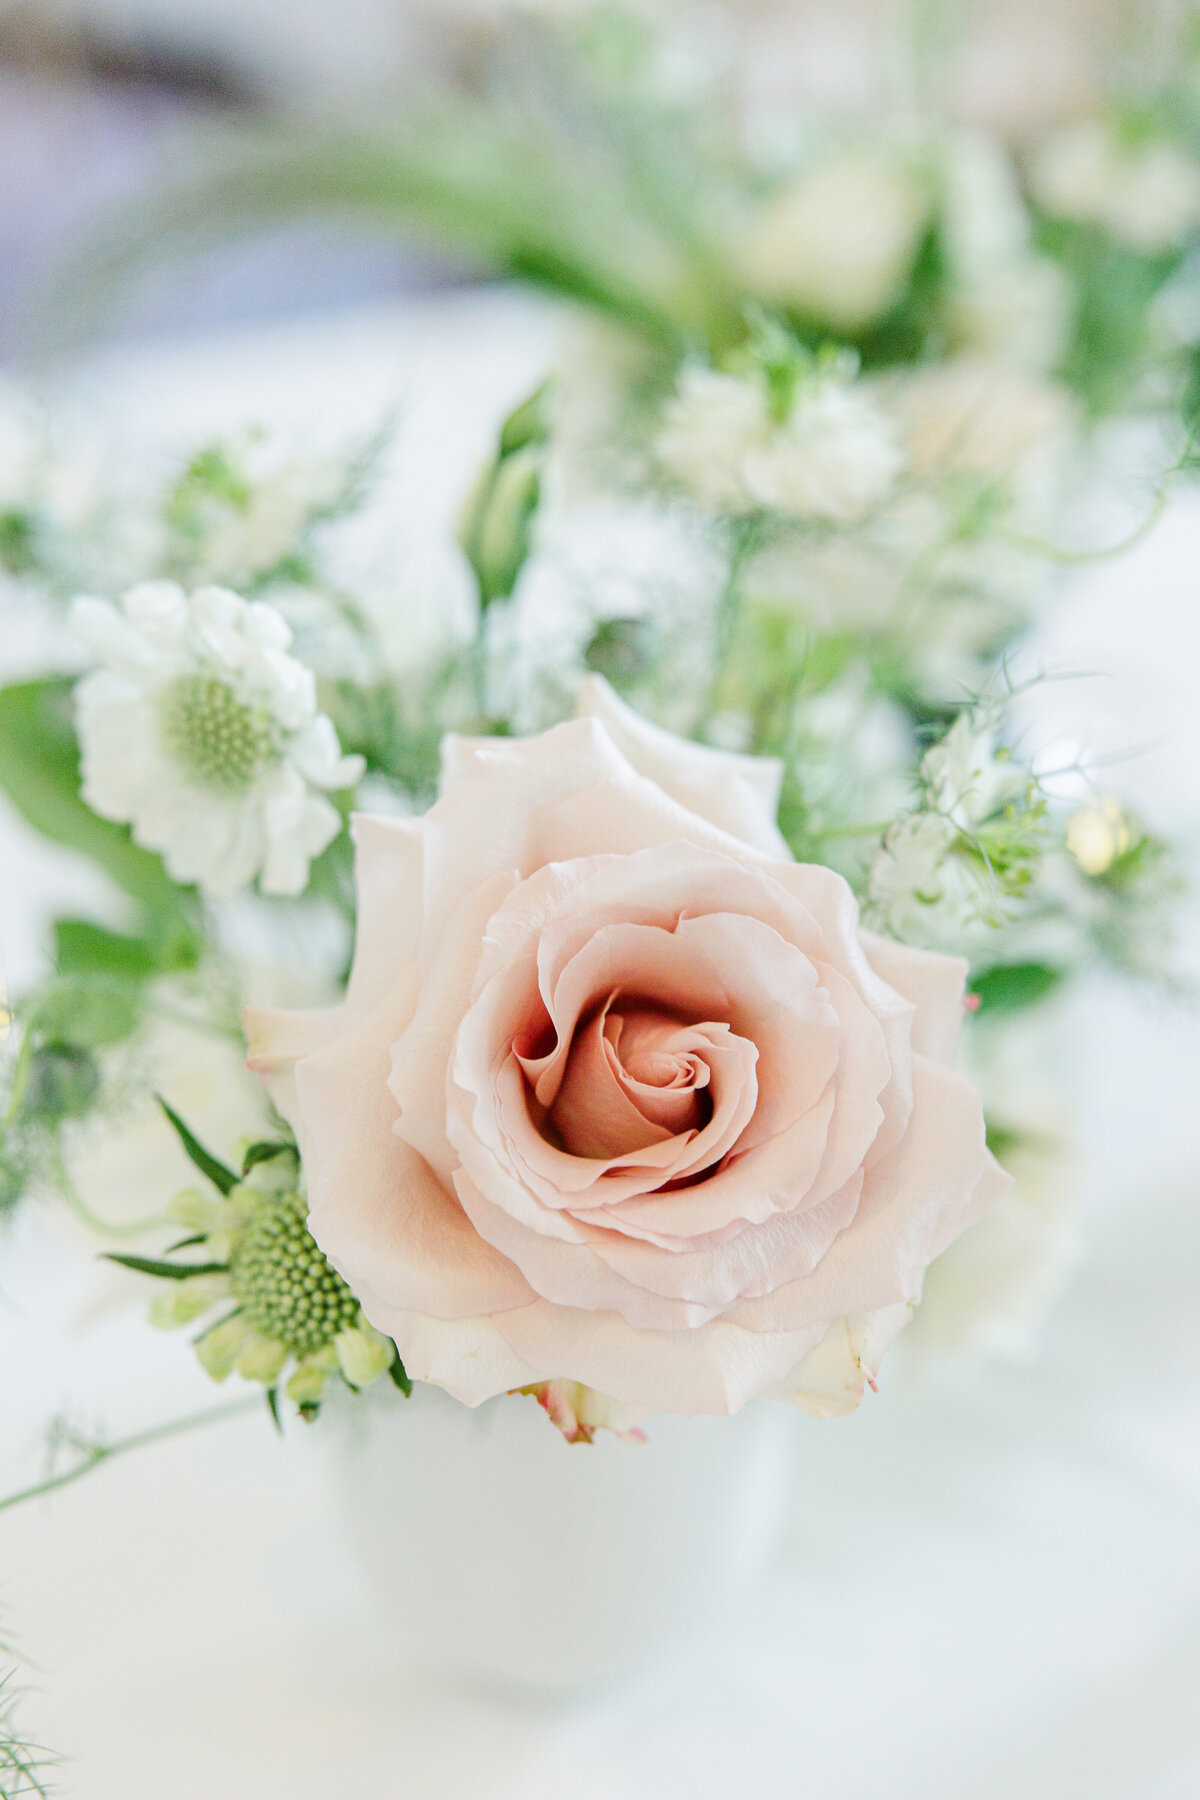 Wedding floral centerpiece with roses